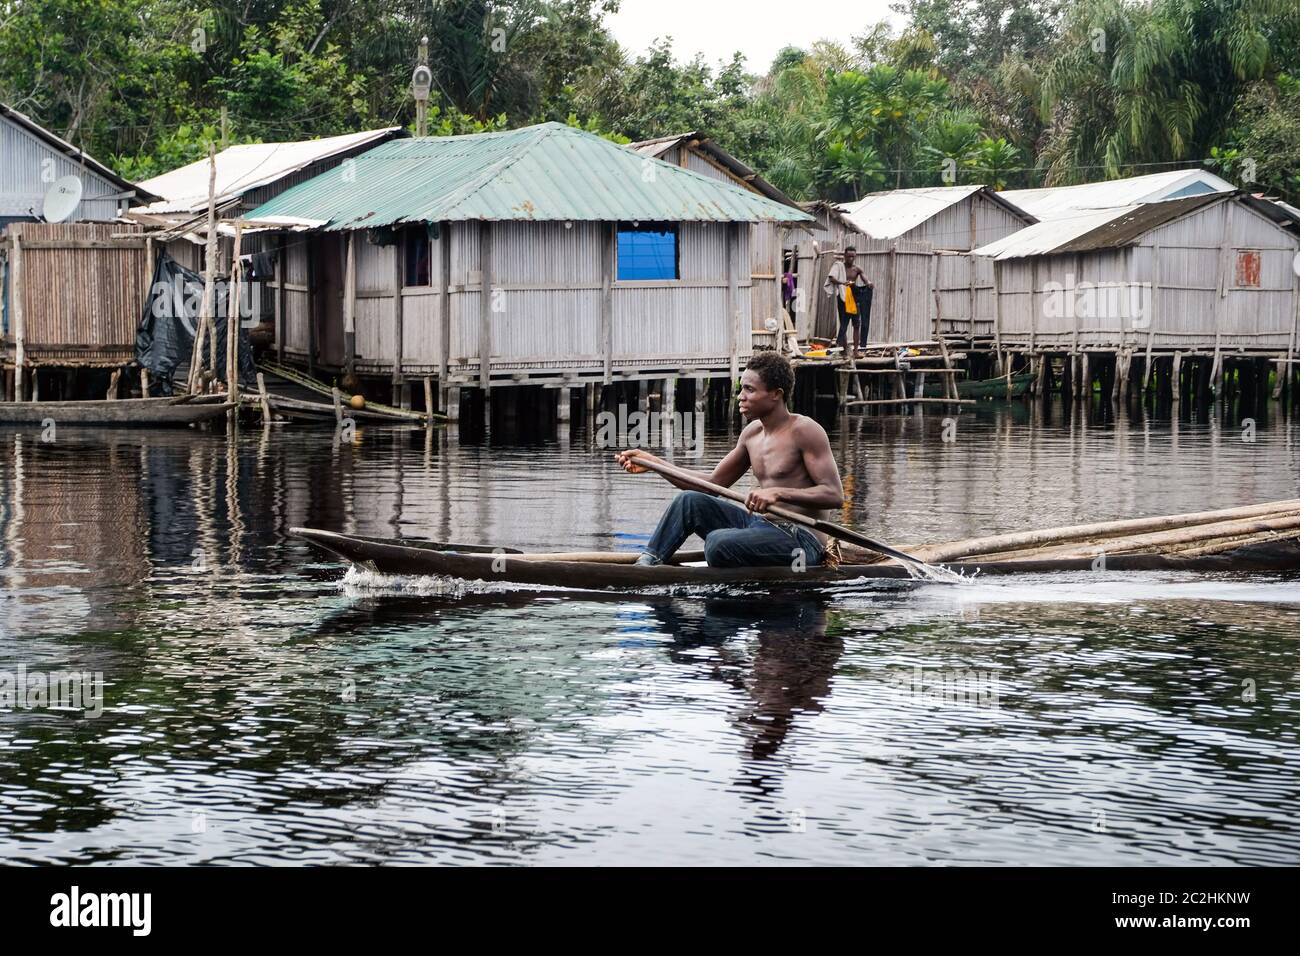 Man in a dugout boat in front of the huts of the stilt village Nzulezo in Lake Amansura, Ghana, Africa Stock Photo